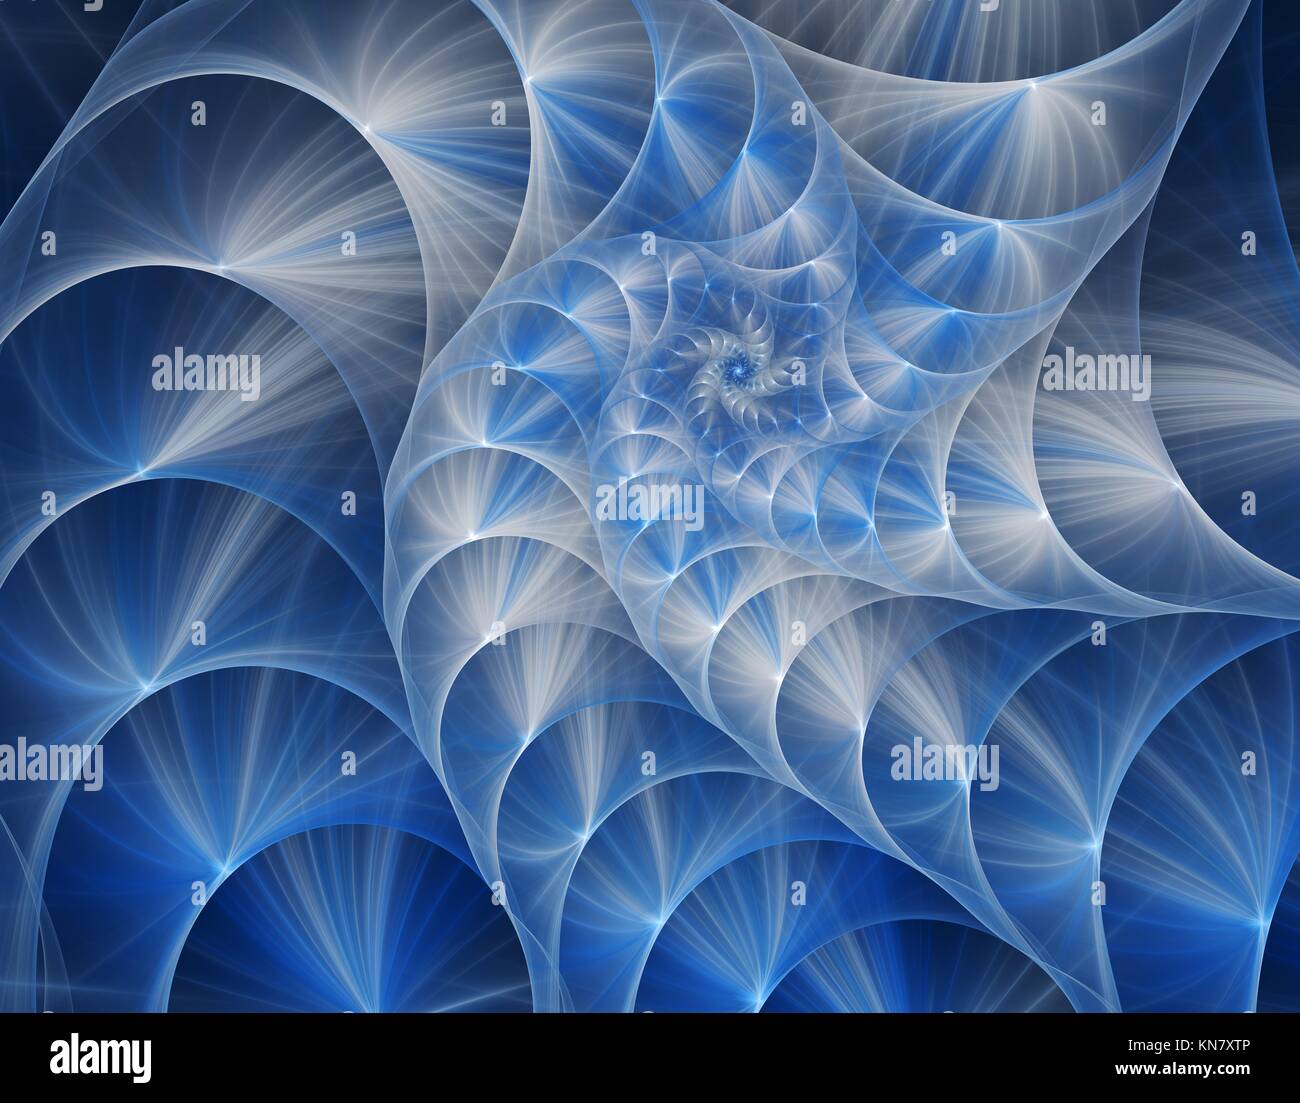 Computer rendered 3d abstract fractal illustration for creative design. Stock Photo